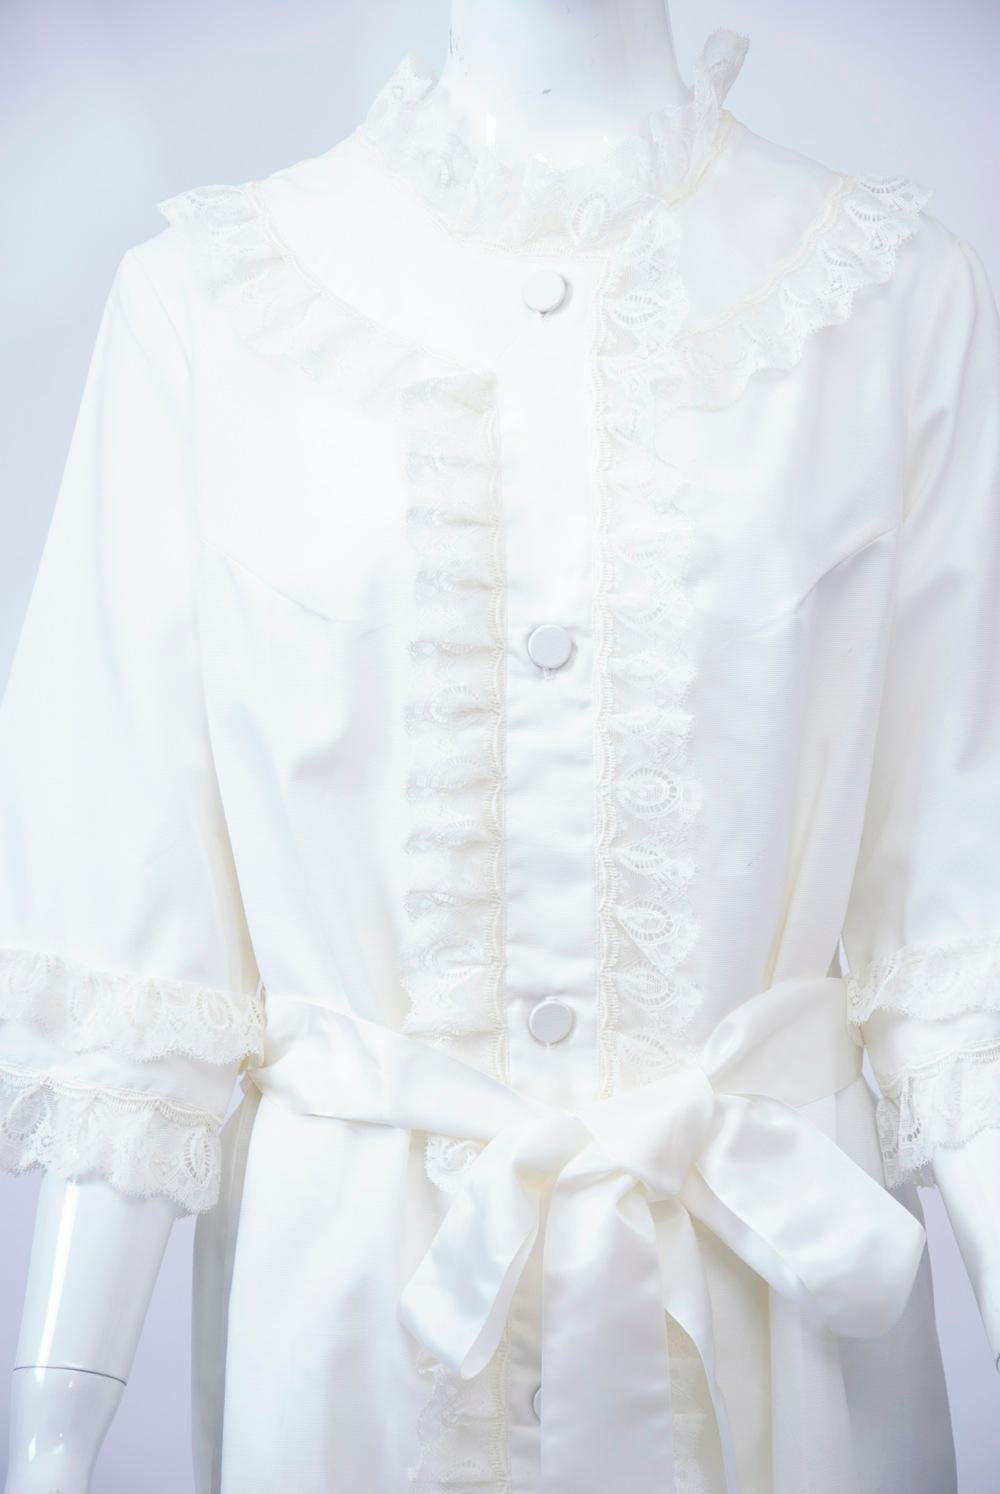 Vintage white lightweight robe by Christian Dior featuring lace trim around all edges and along yoke and button-down placket. The robe also boasts elbow-length sleeves, self buttons down the front, and a satin sash to finish it off. Approximate size